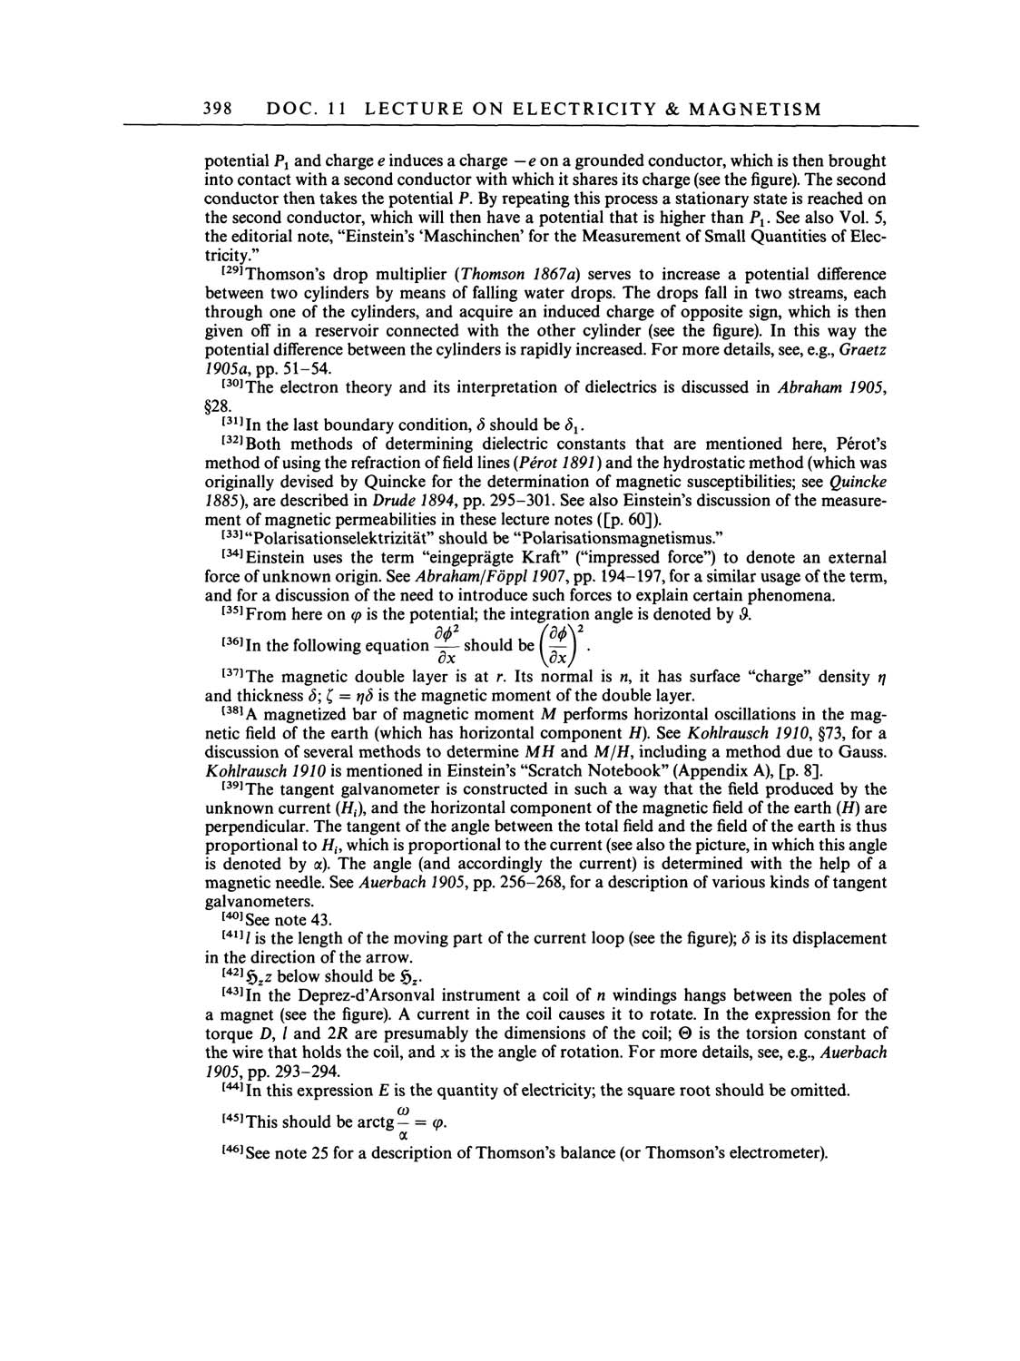 Volume 3: The Swiss Years: Writings 1909-1911 page 398